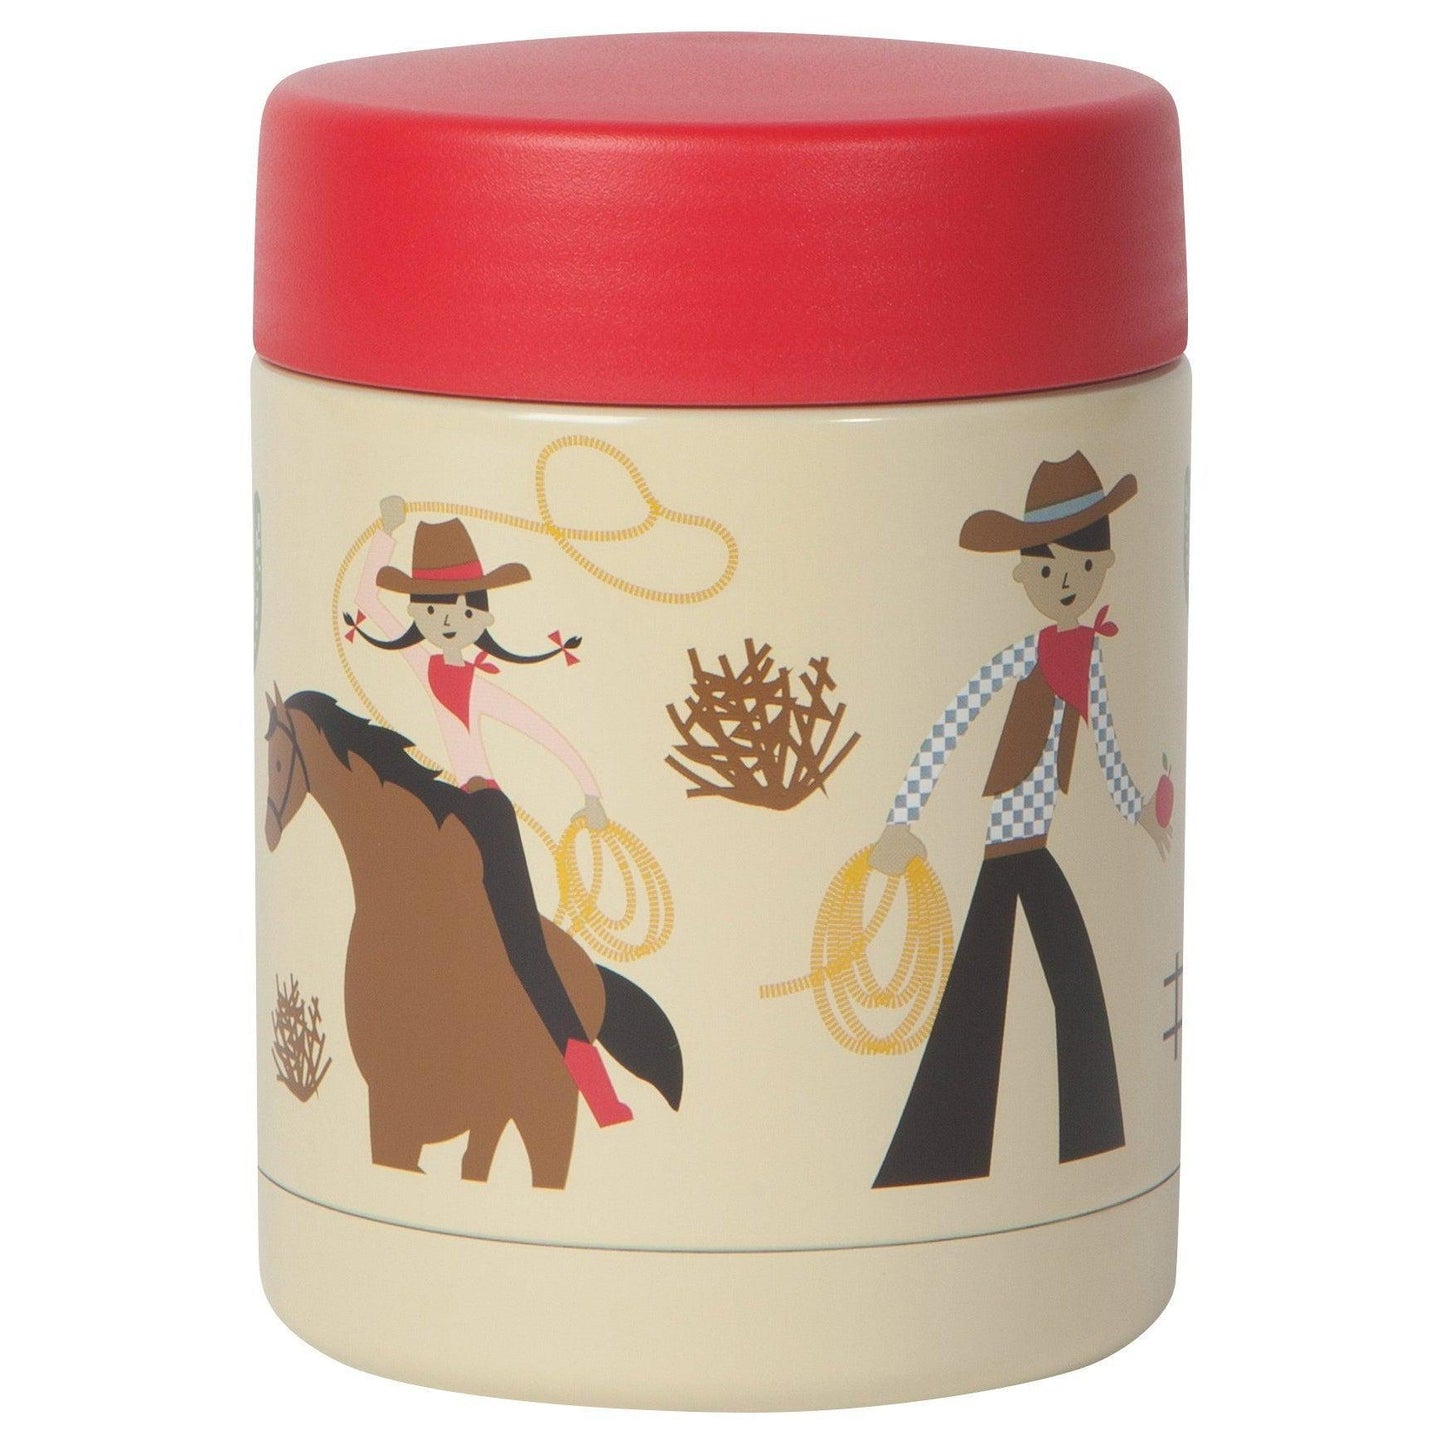 Food Jar Thermos - Wild West on the go Now Designs Prettycleanshop